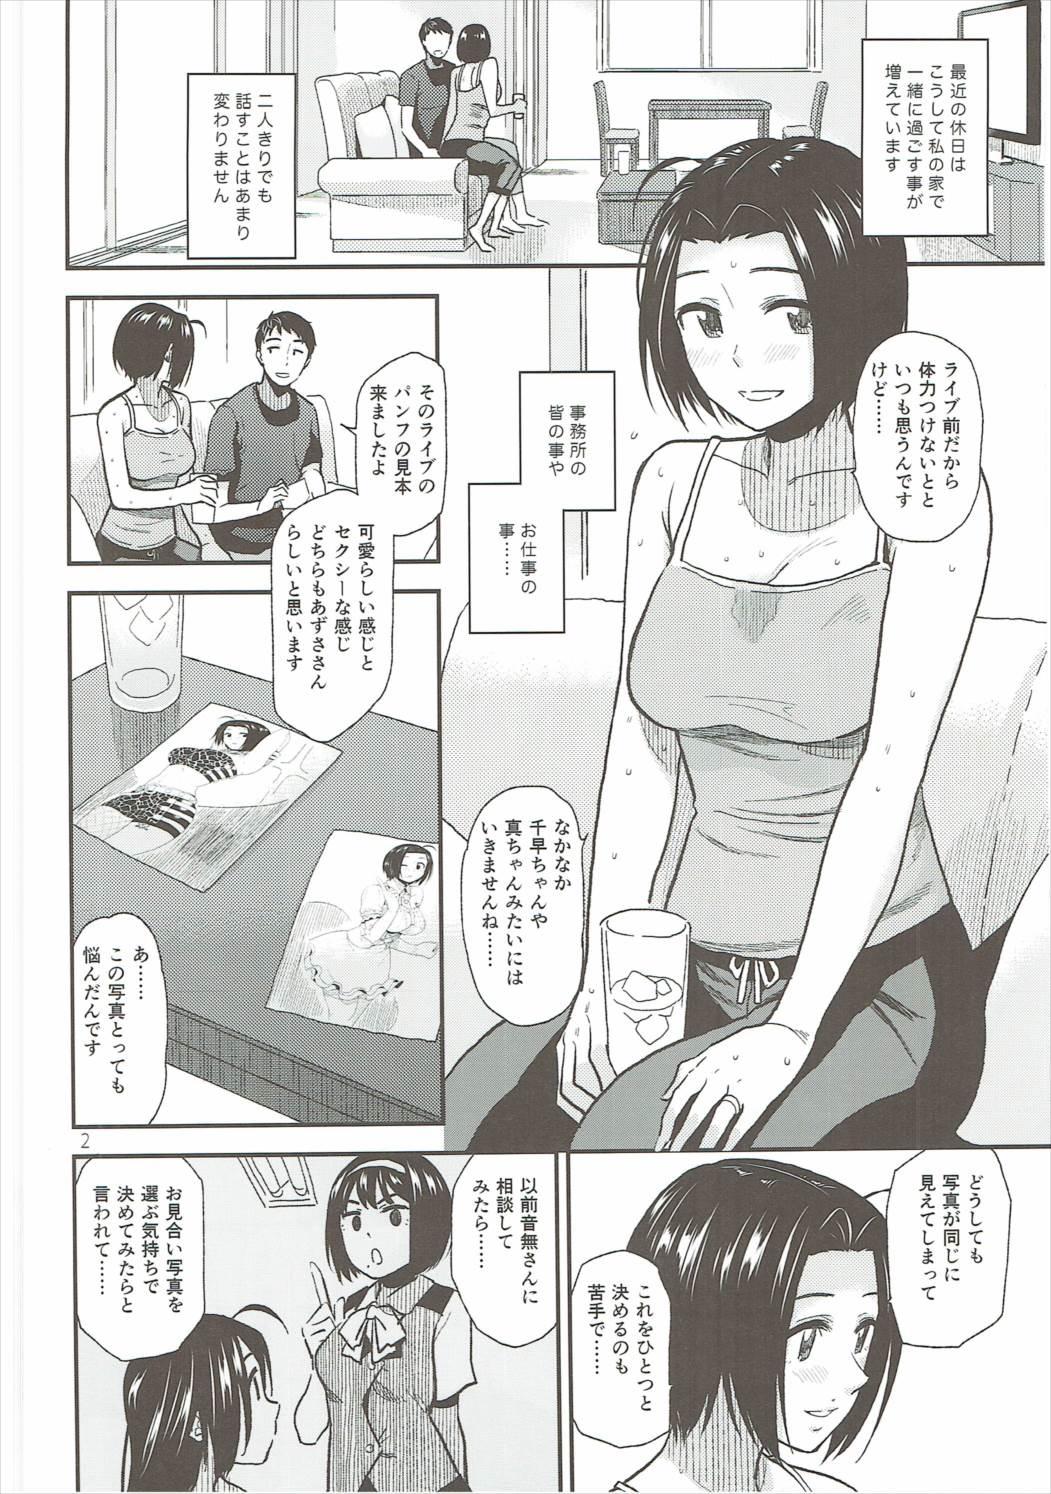 Studs Tender Time 2 - The idolmaster Staxxx - Page 3